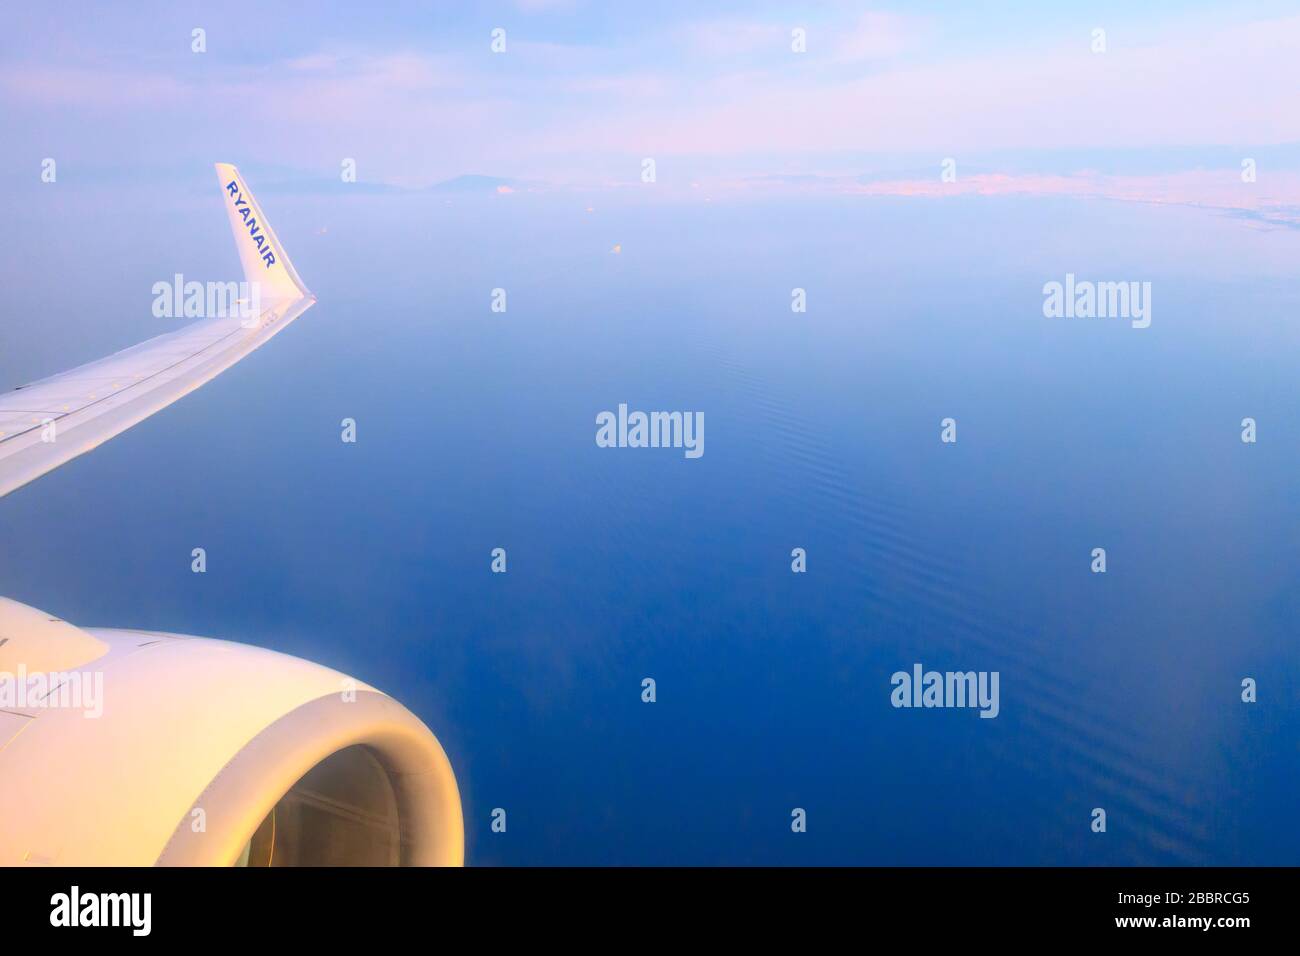 Athens, Greece - April 22, 2019: Low-cost airline Ryanair logo on airplane's wing and turbine, blue sea and Athens coastline Stock Photo